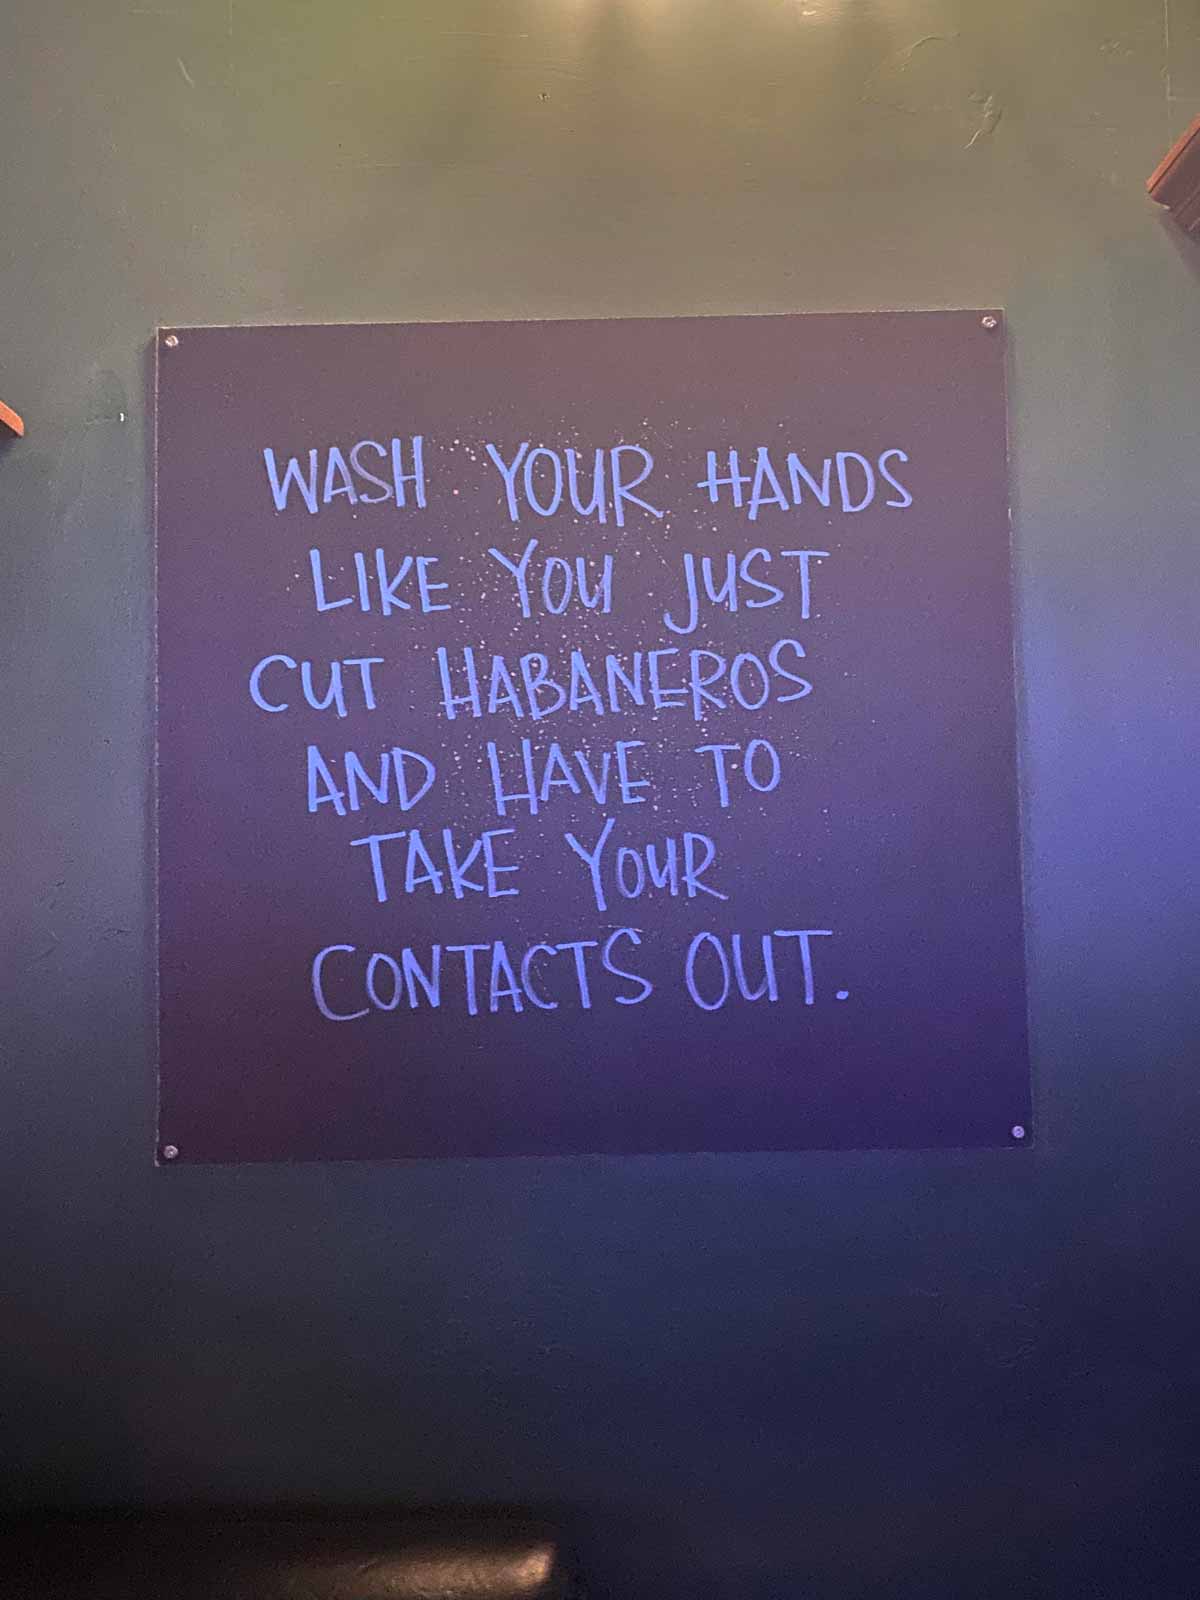 Funny bathroom sign that says 'wash your hands like you just cut habanero and have to take your contacts out'